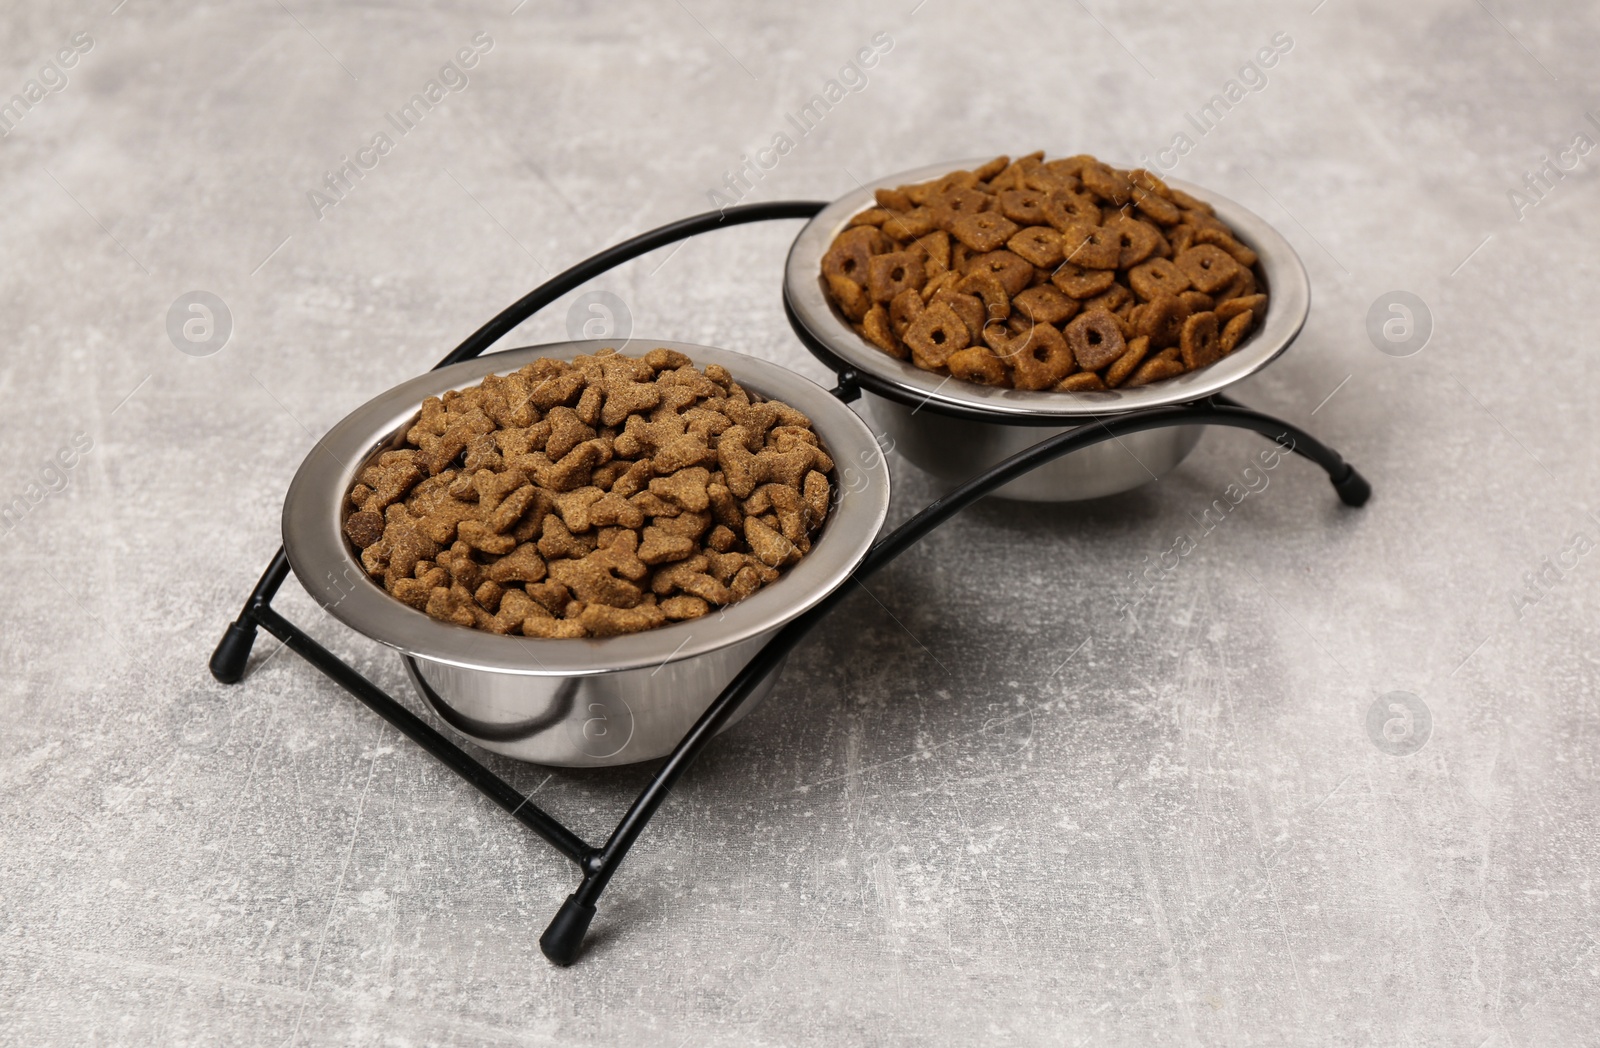 Photo of Dry food in pet bowls on grey surface